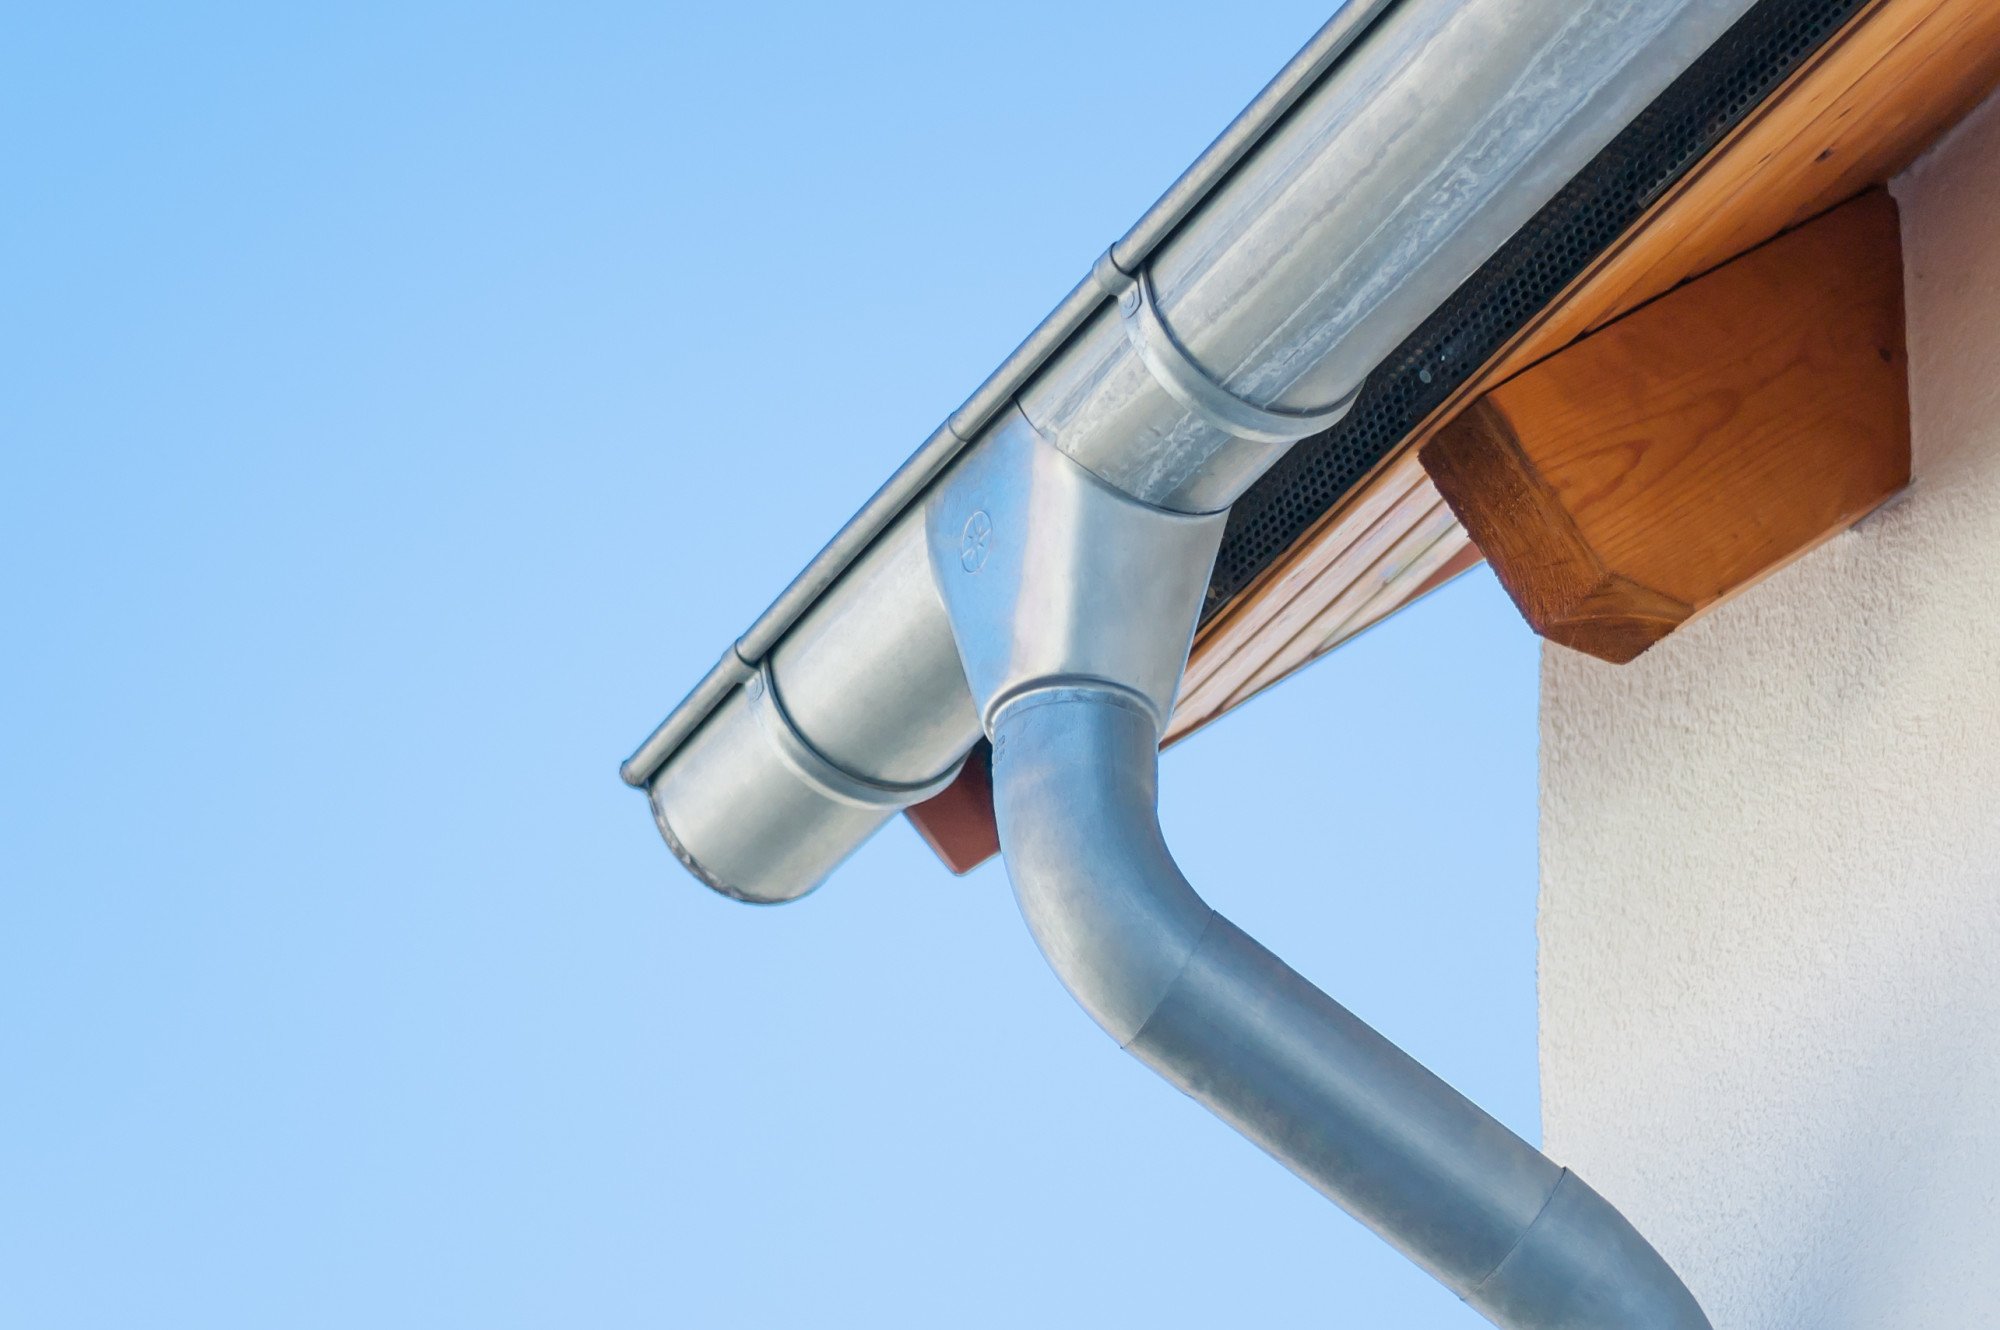 Correct gutter slope plays an important role in keeping your home water tight. See our guide about calculating correct gutter slope for maximum efficiency.